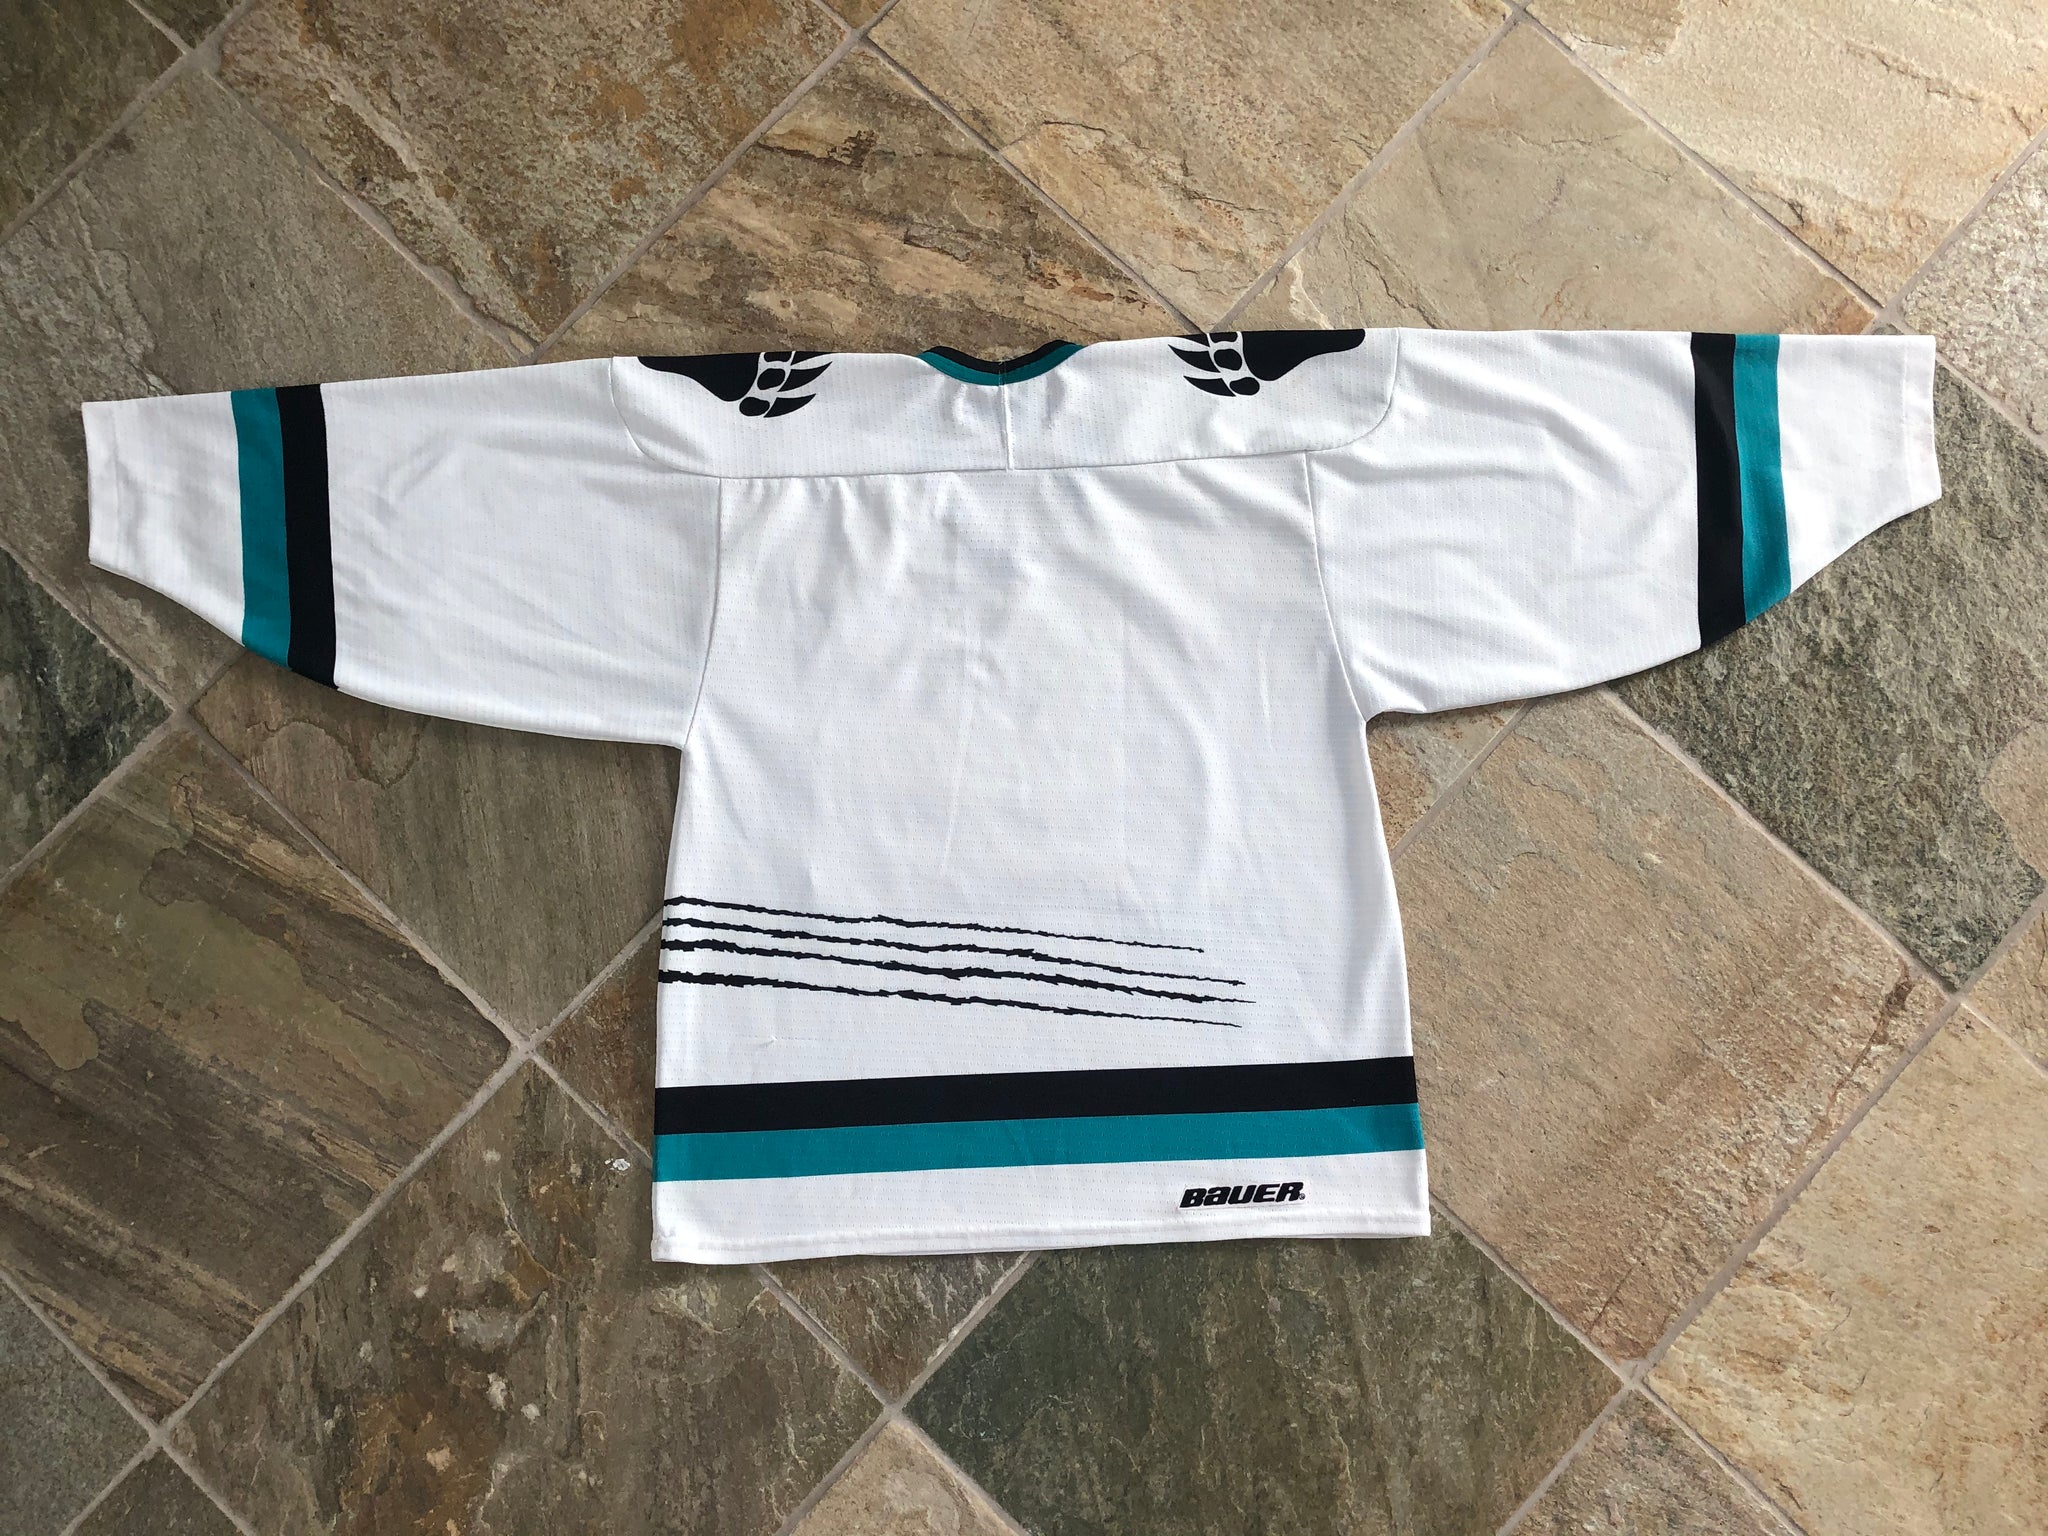 2020-2021 (echl) Utah Grizzlies Jersey with the 25 year